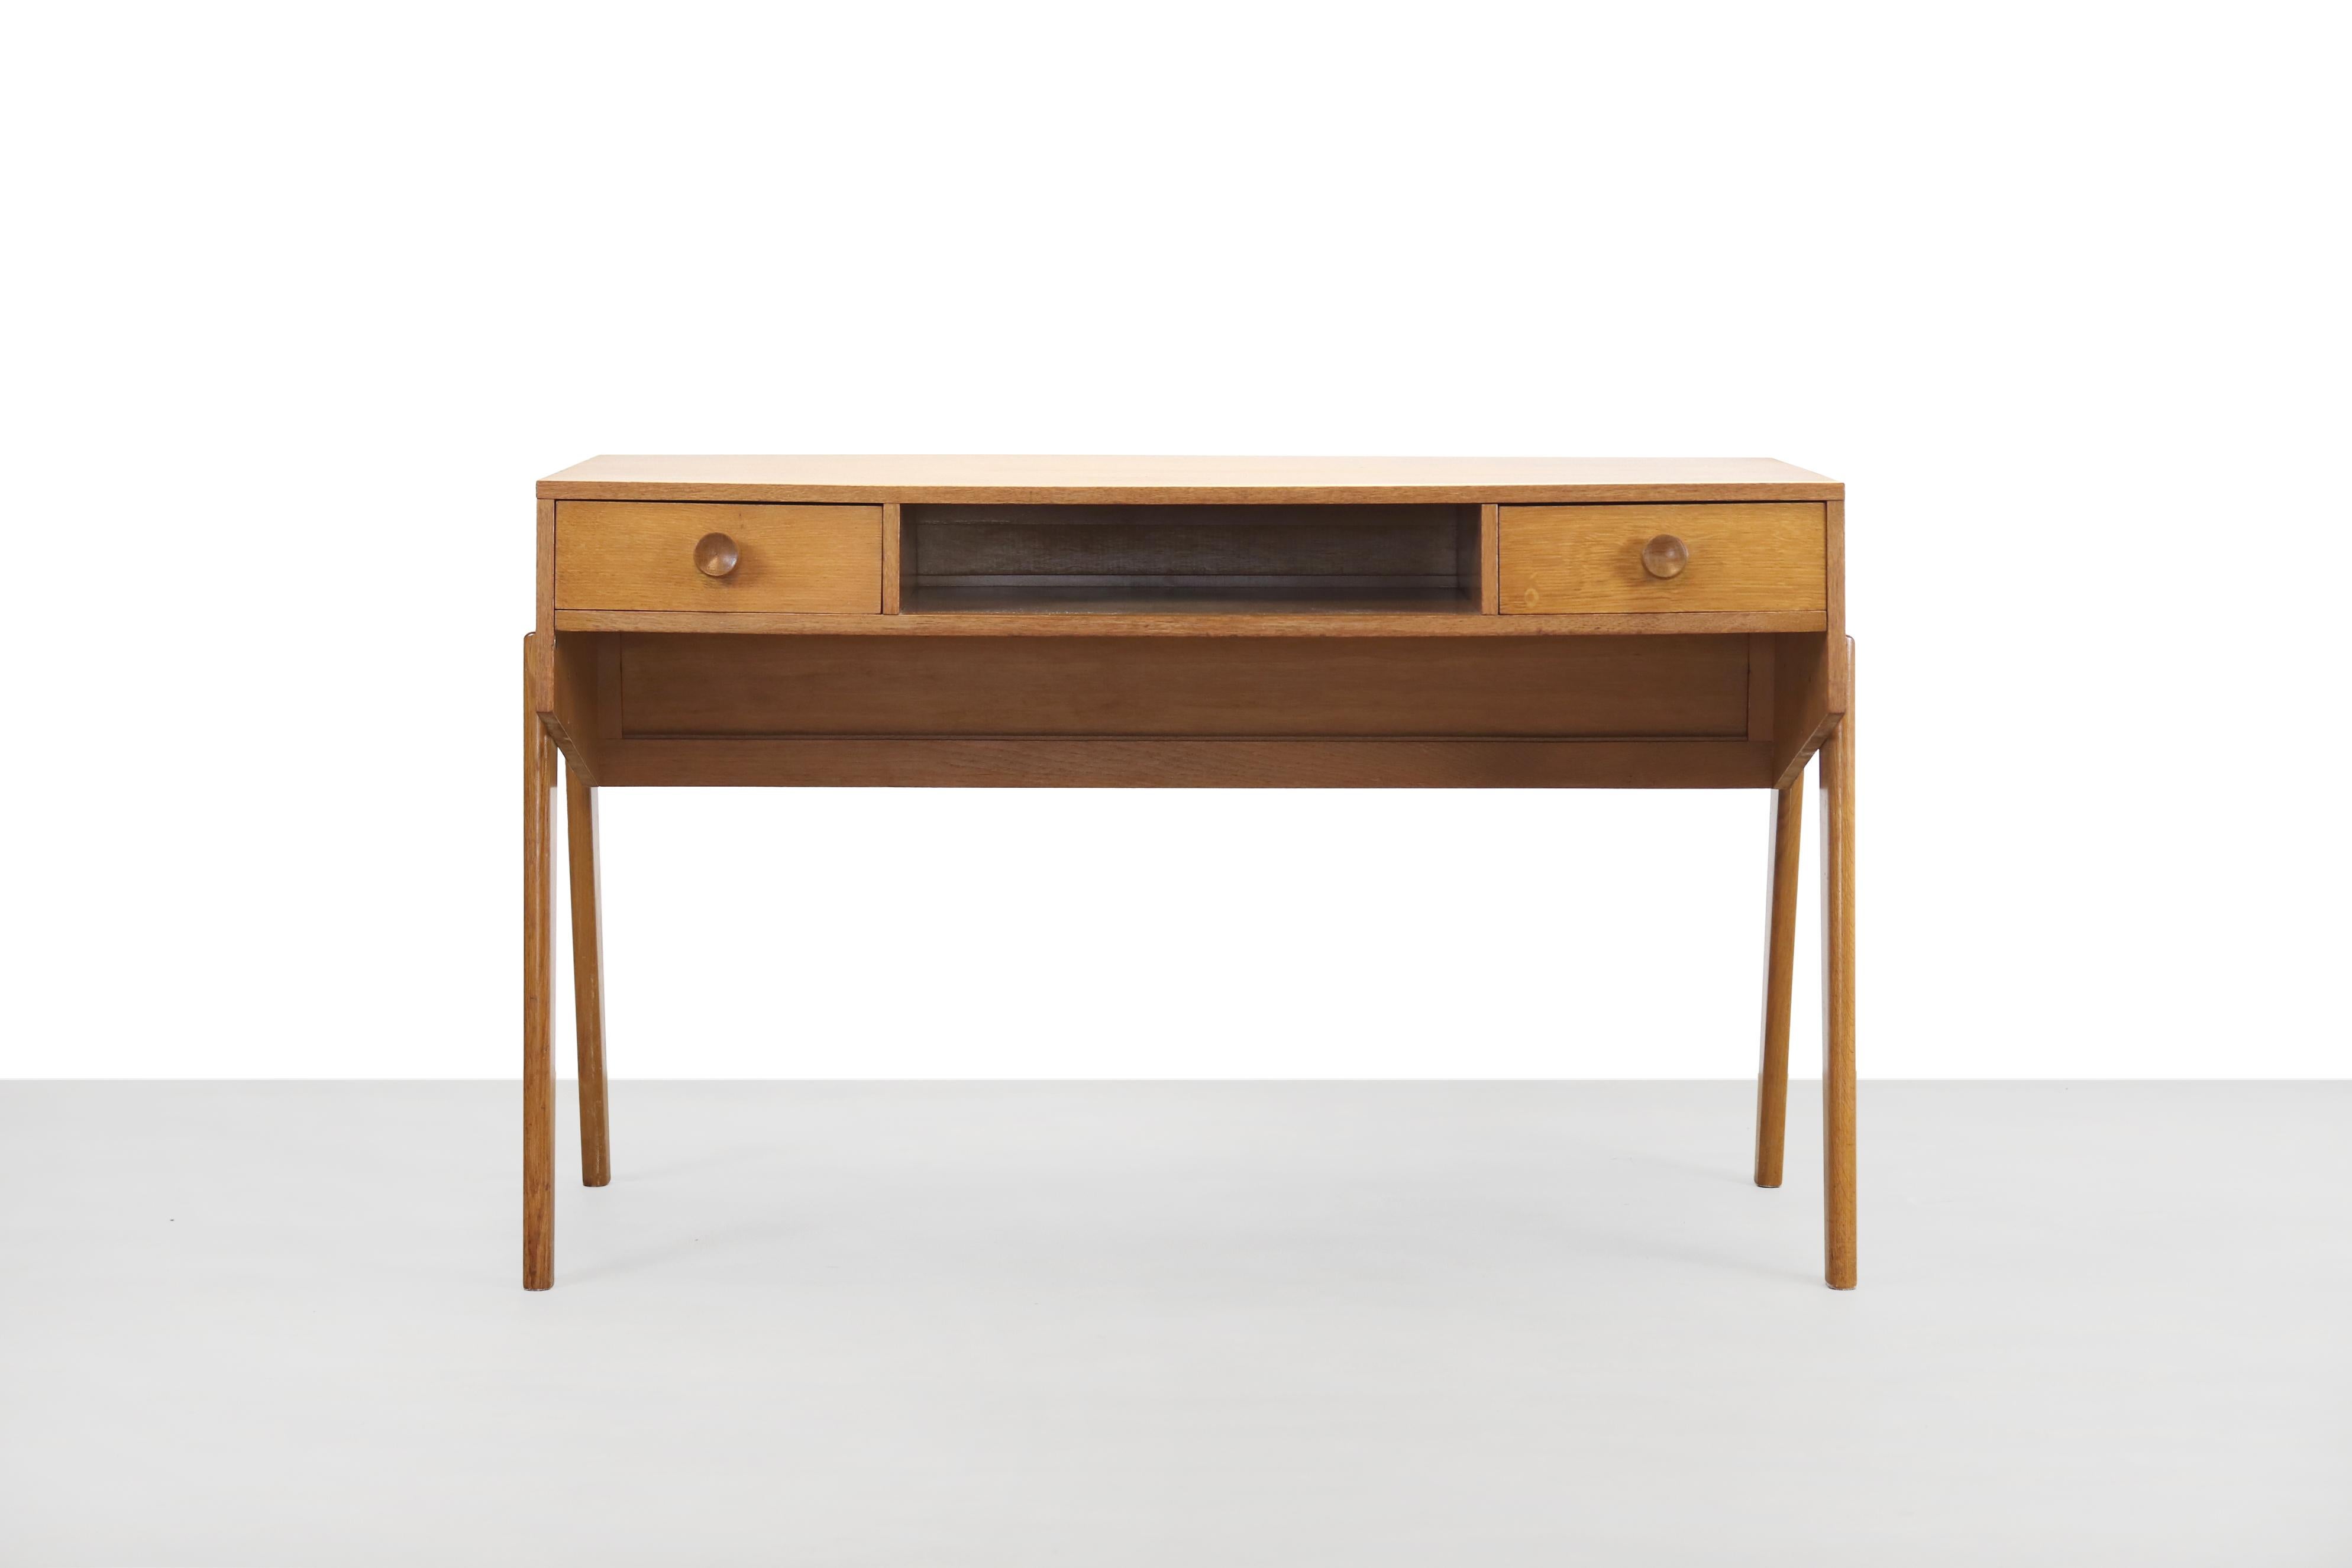 Beautifully designed desk from Eeka Meubelen. This desk is attributed to designer Coen de Vries. De Vries designed a series of furniture for Eeka, unfortunately there is little documentation for this. If we compare the designs from just after the